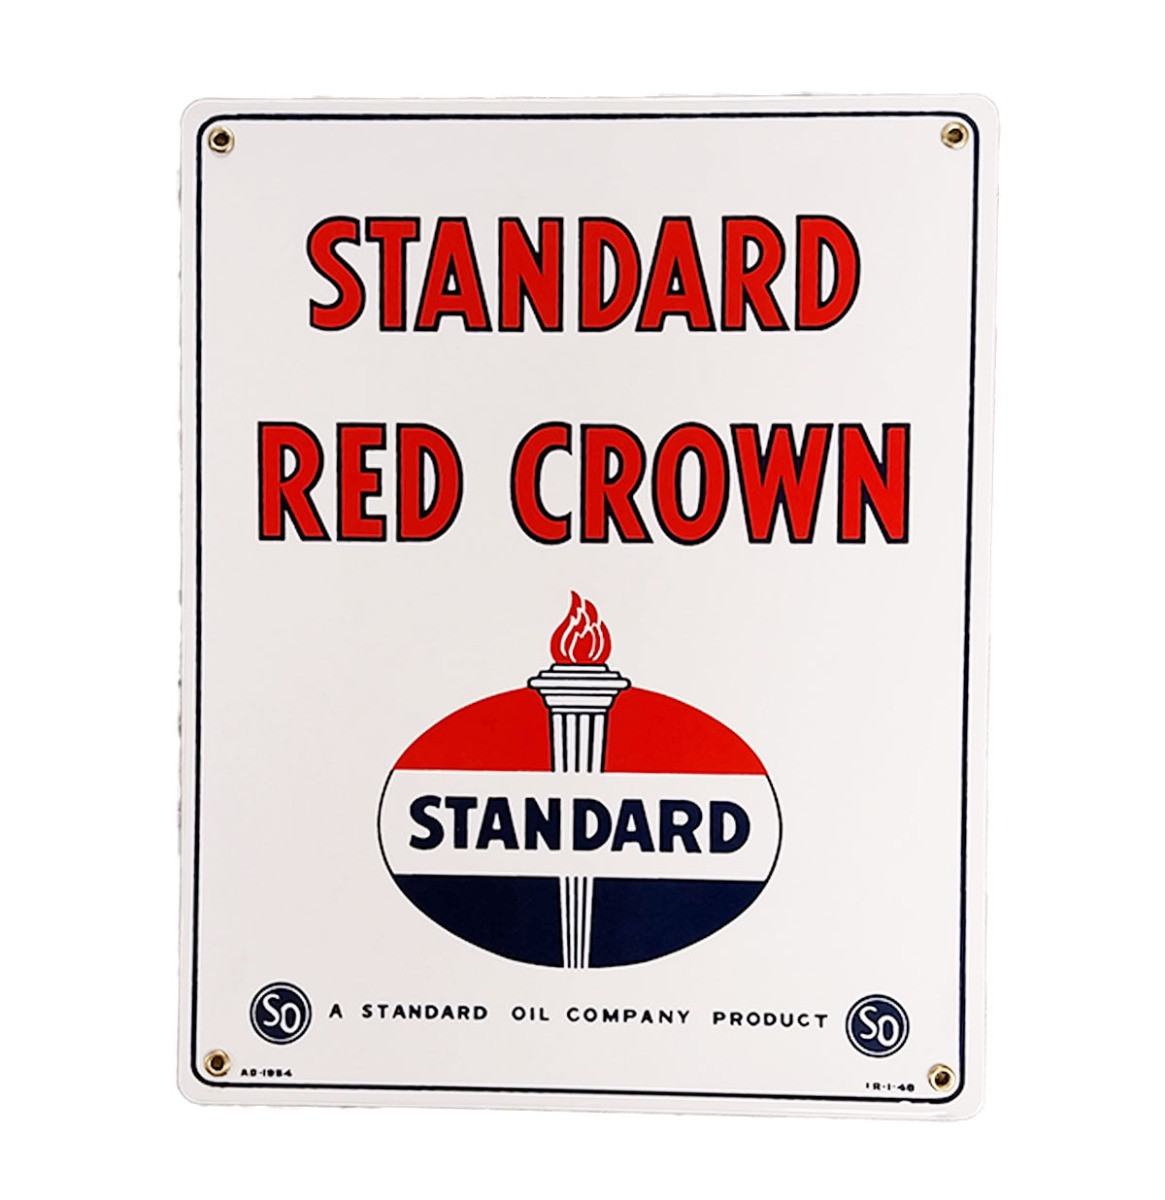 Standard Red Crown Emaille Bord - 38 x 30,5cm